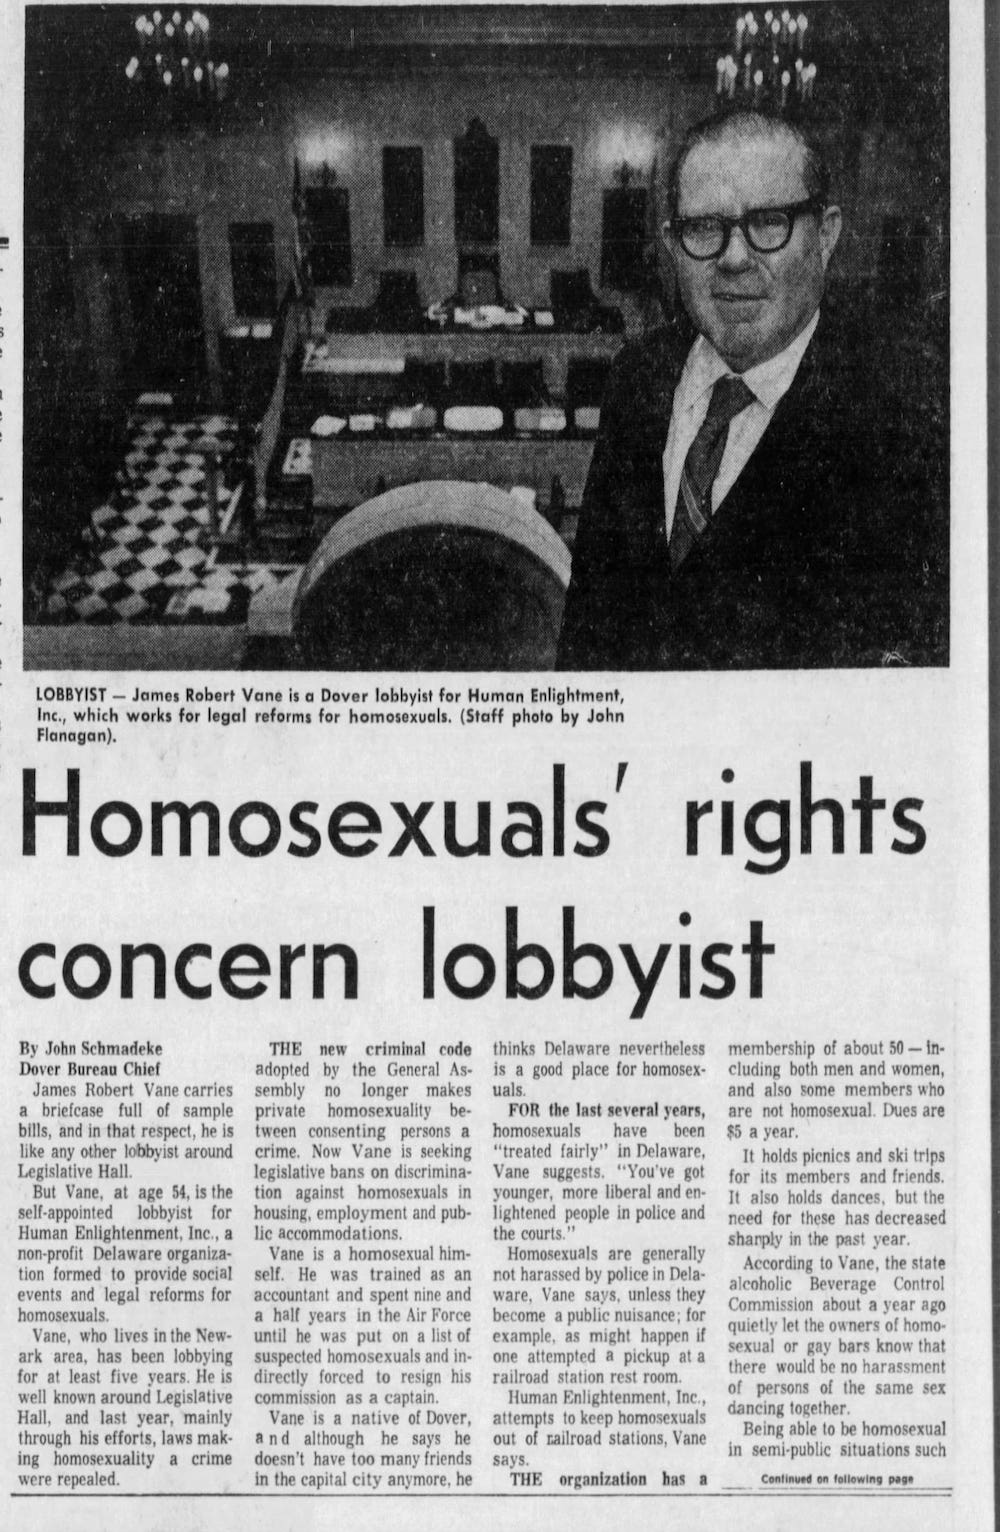 An article with the title “Homosexuals’ rights concern lobbyist.” appears next to a photo of a white man wearing a suit in Legislative Hall.